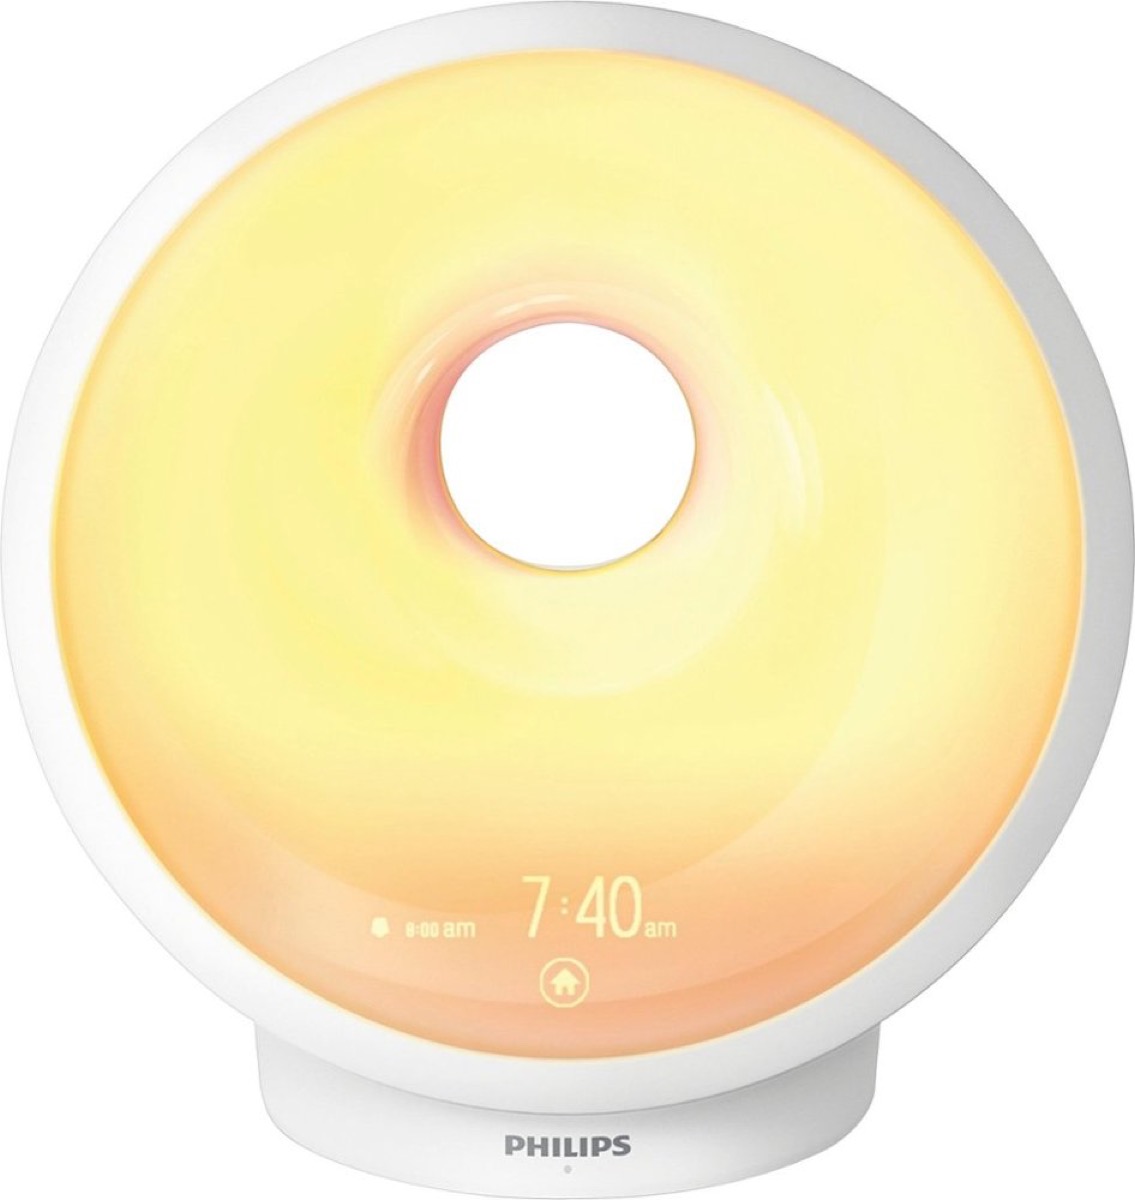 Philips Wake-Up Light Mother's Day Gifts